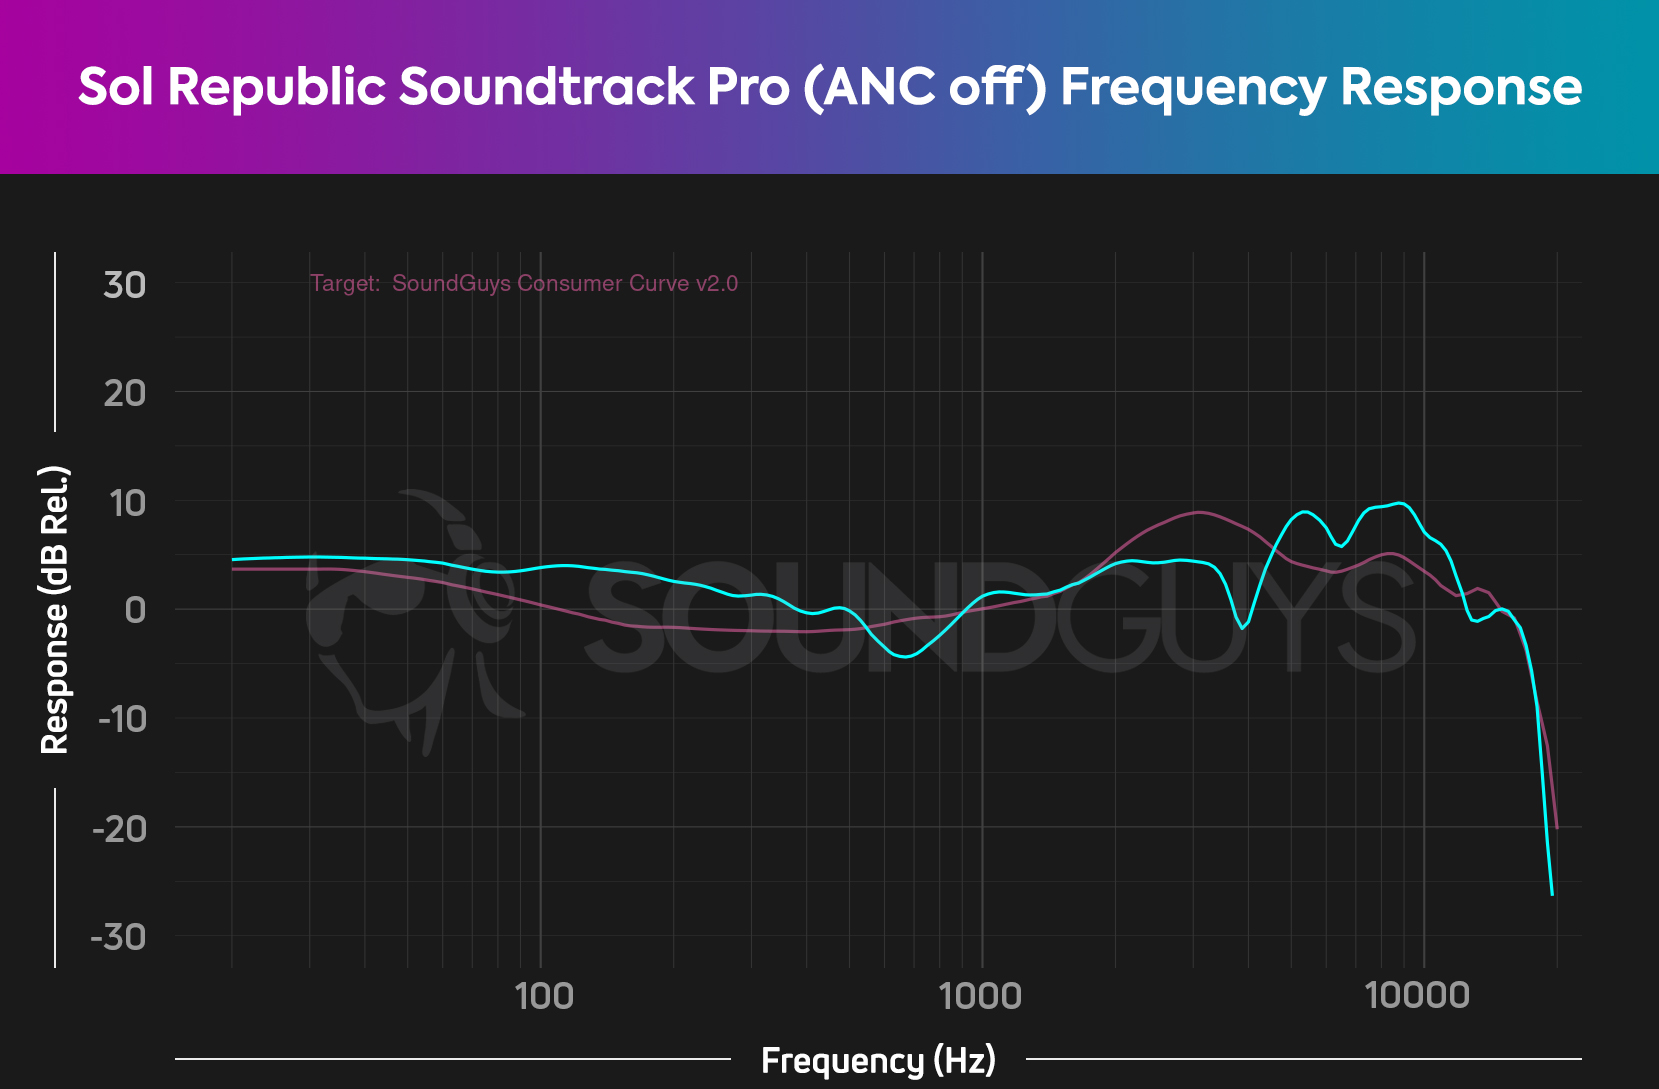 A chart showing the frequency response of the Sol Republic Soundtrack Pro with a minor dip in mid frequencies when ANC is turned off.